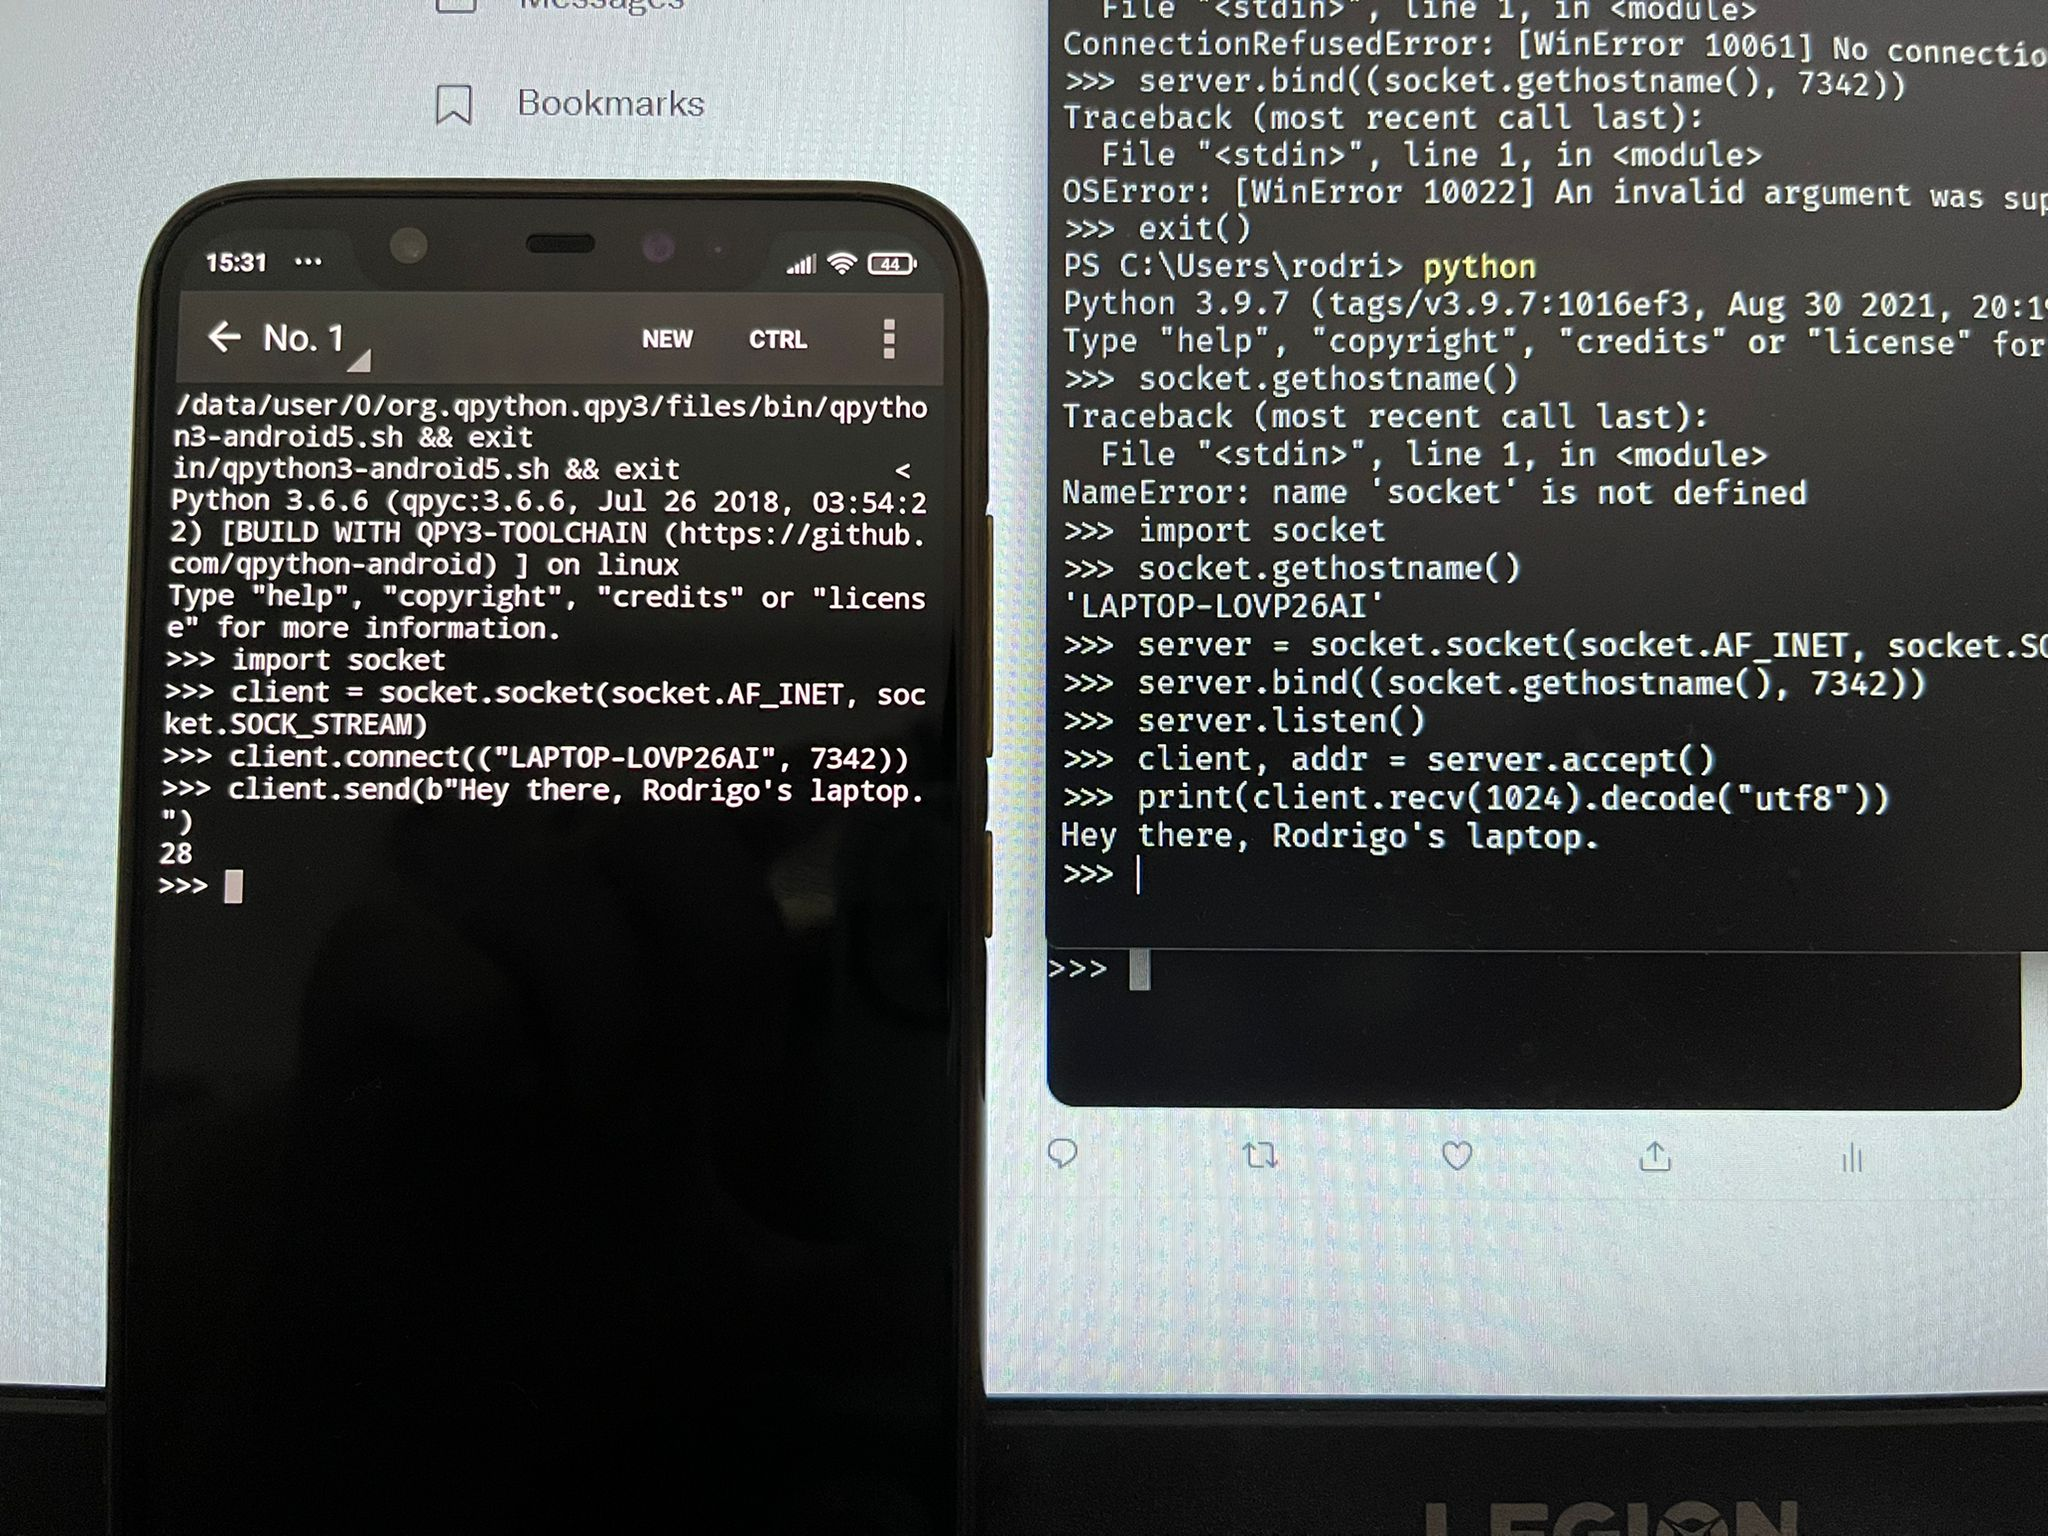 A picture of a phone and a laptop, showing that the phone managed to use Python to send data into the laptop through sockets, one of the experiments done in this Python tutorial that serves as an introduction to sockets and networking.